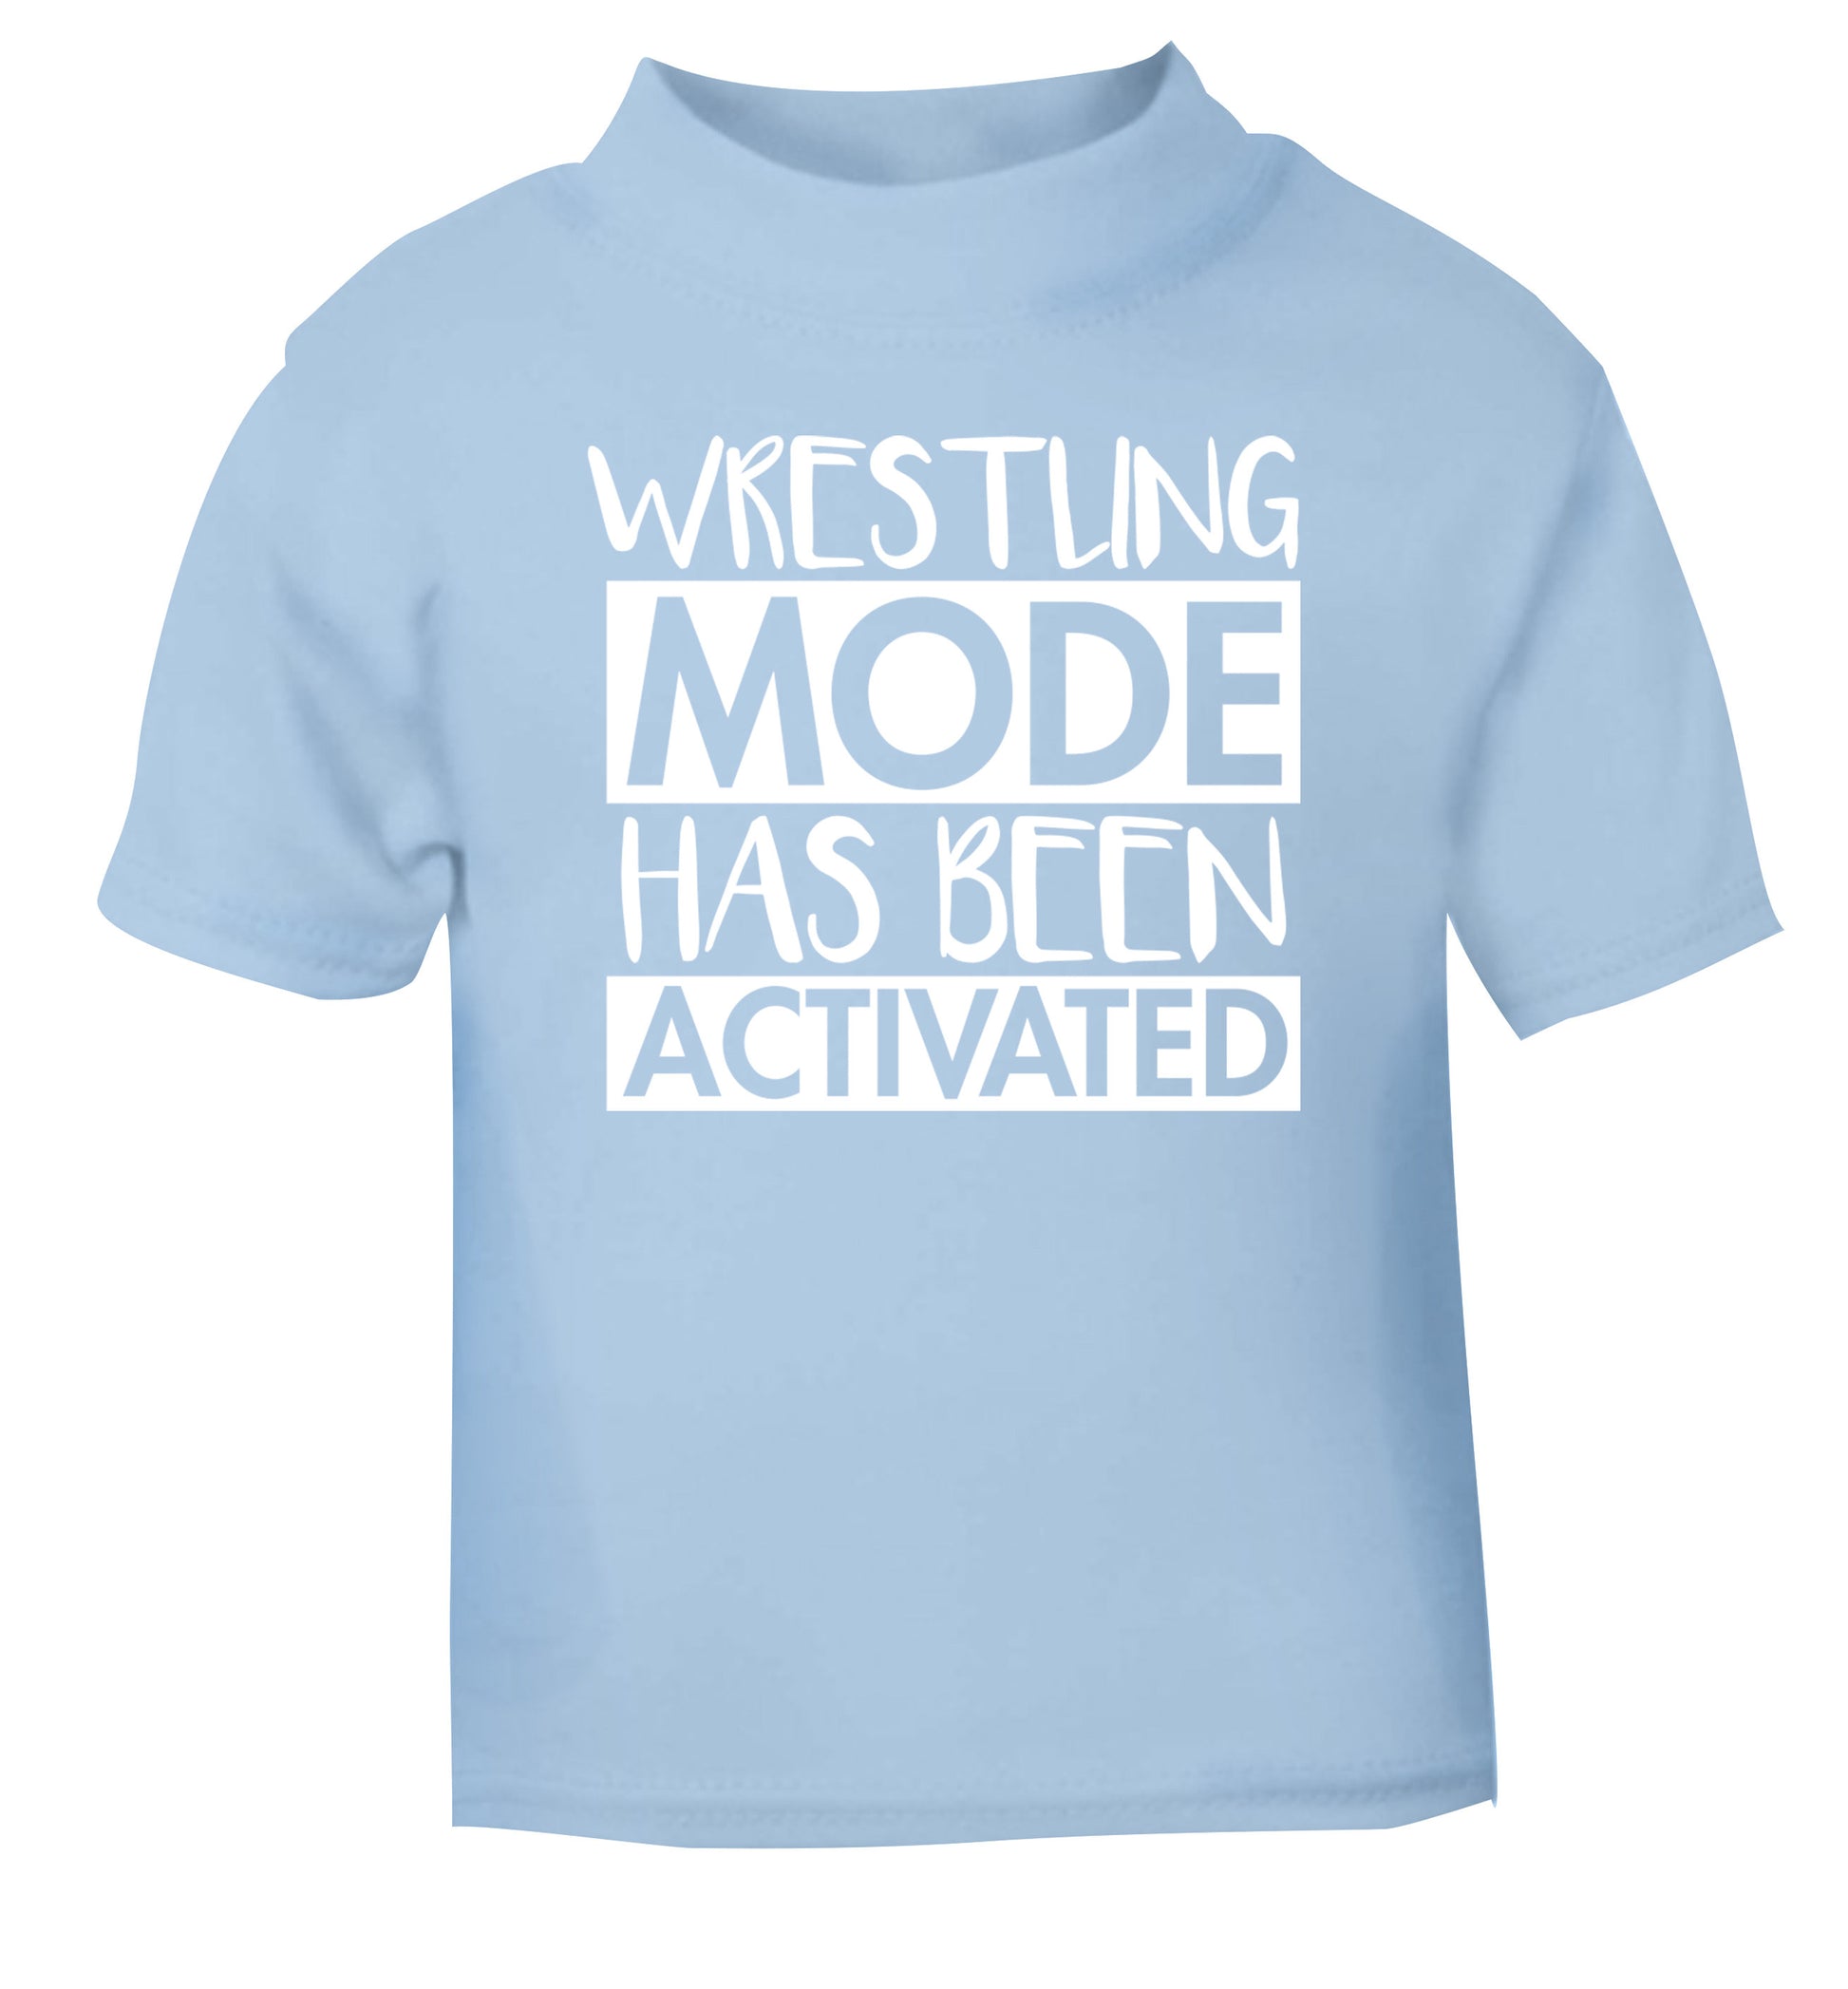 Wresting mode activated light blue Baby Toddler Tshirt 2 Years